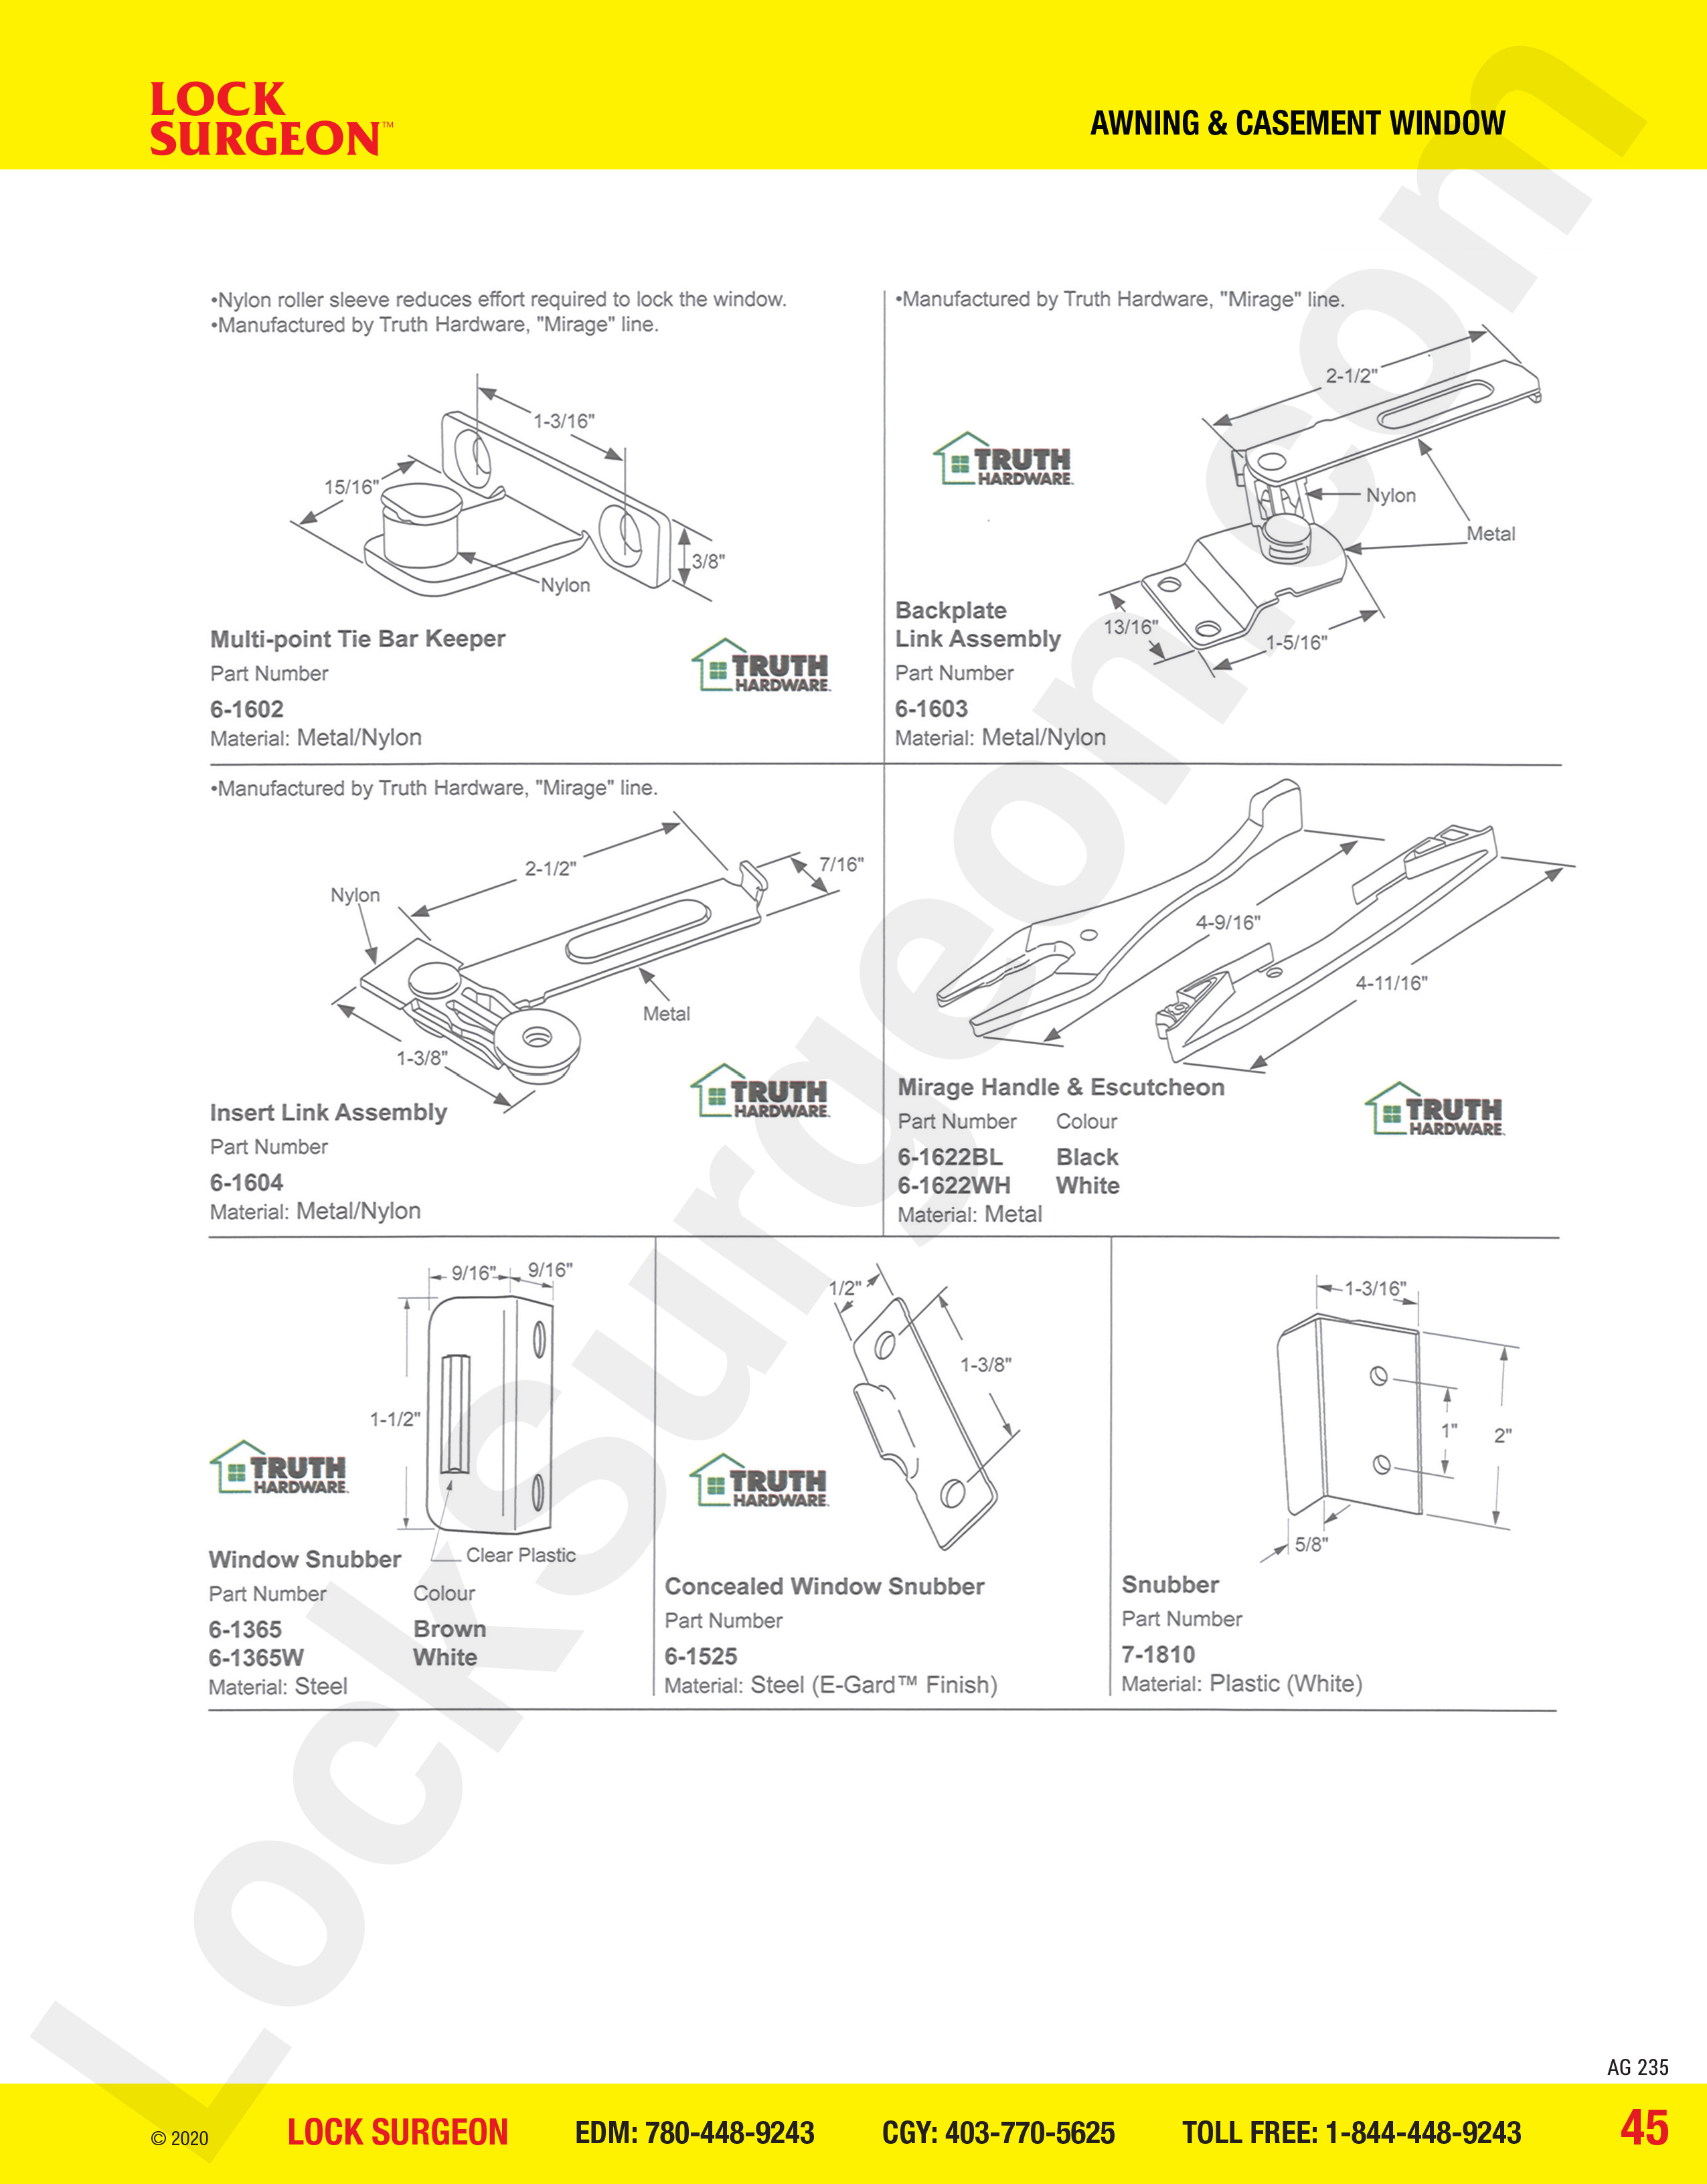 Acheson mobile awning and casement window parts for snubbers